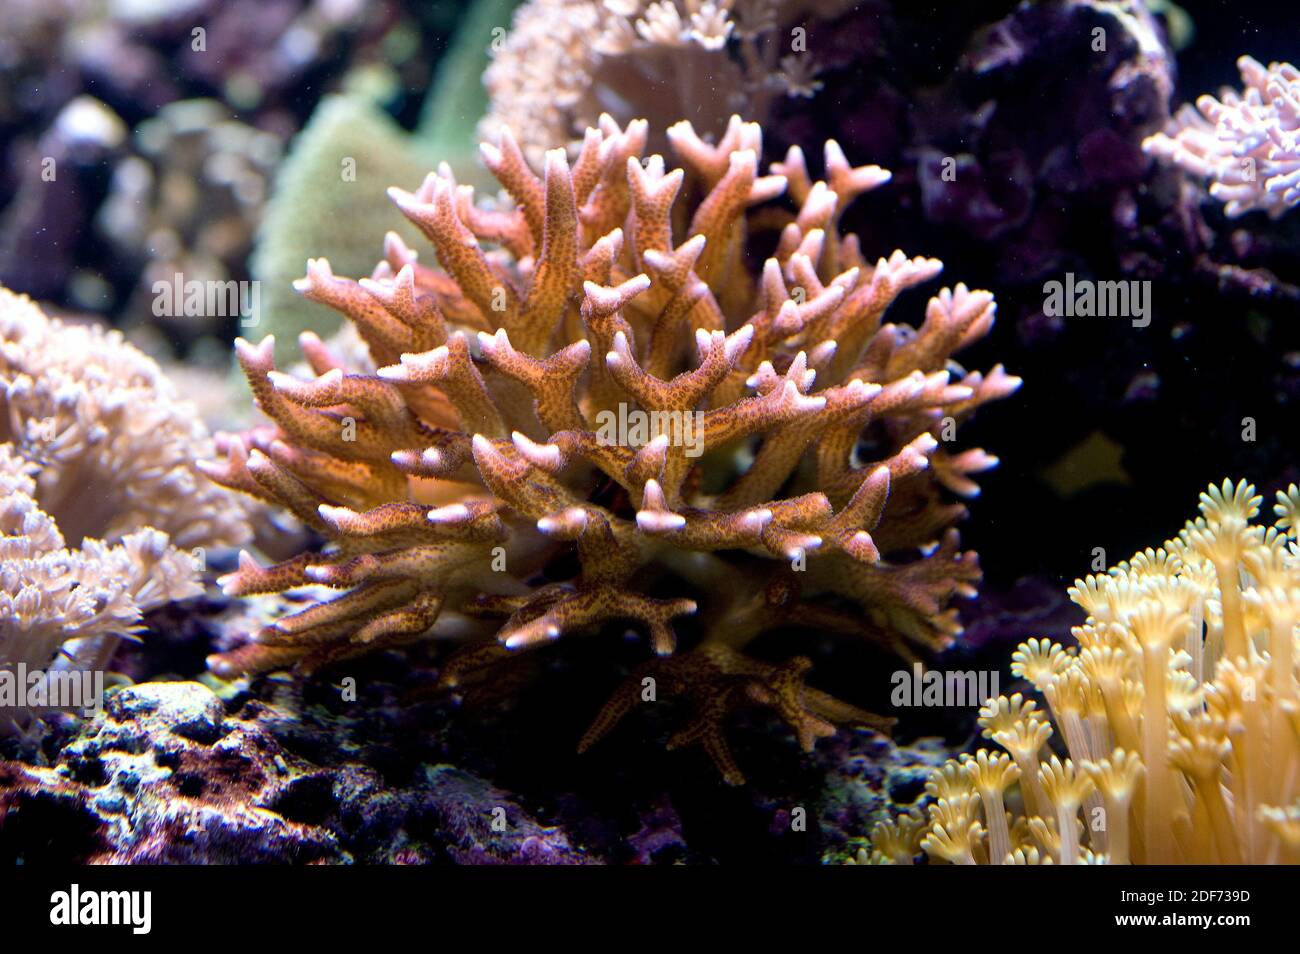 Staghorn coral (Acropora cervicornis) is a stony coral native to Tropical Seas. Cnidaria. Anthozoa. Acroporidae. This photo was taken in captivity. Stock Photo